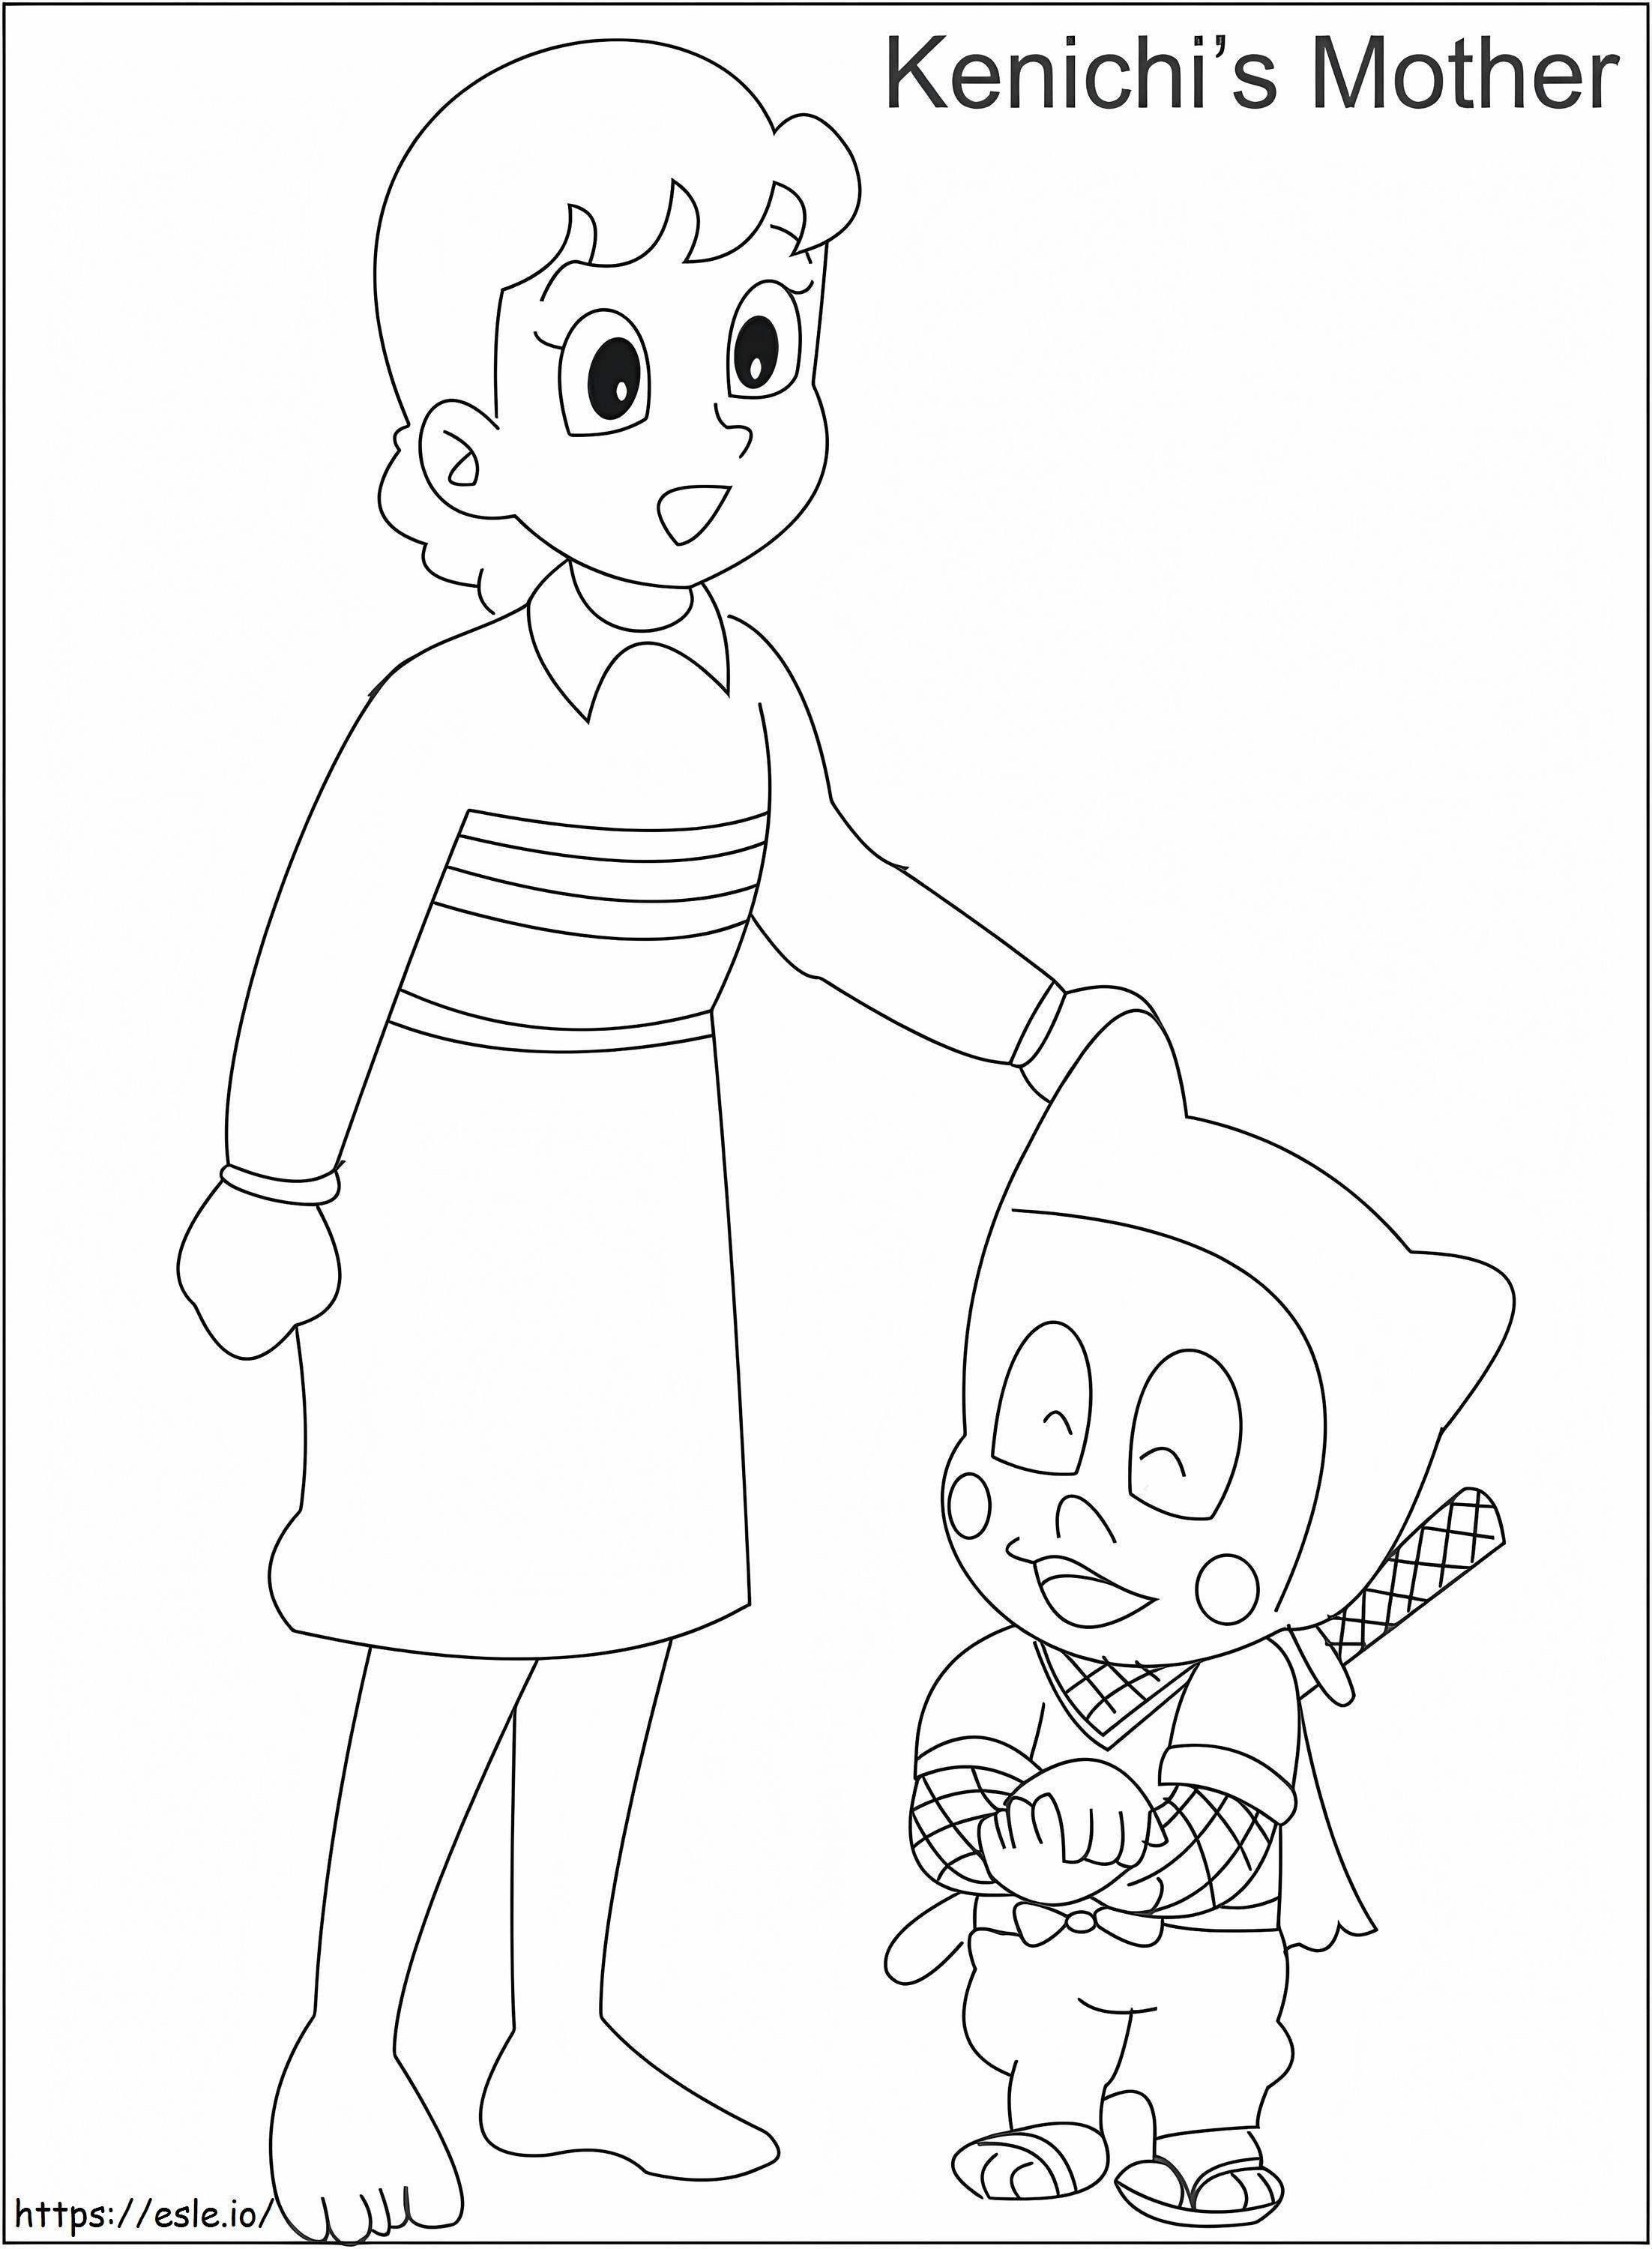 Kenichis Mother coloring page